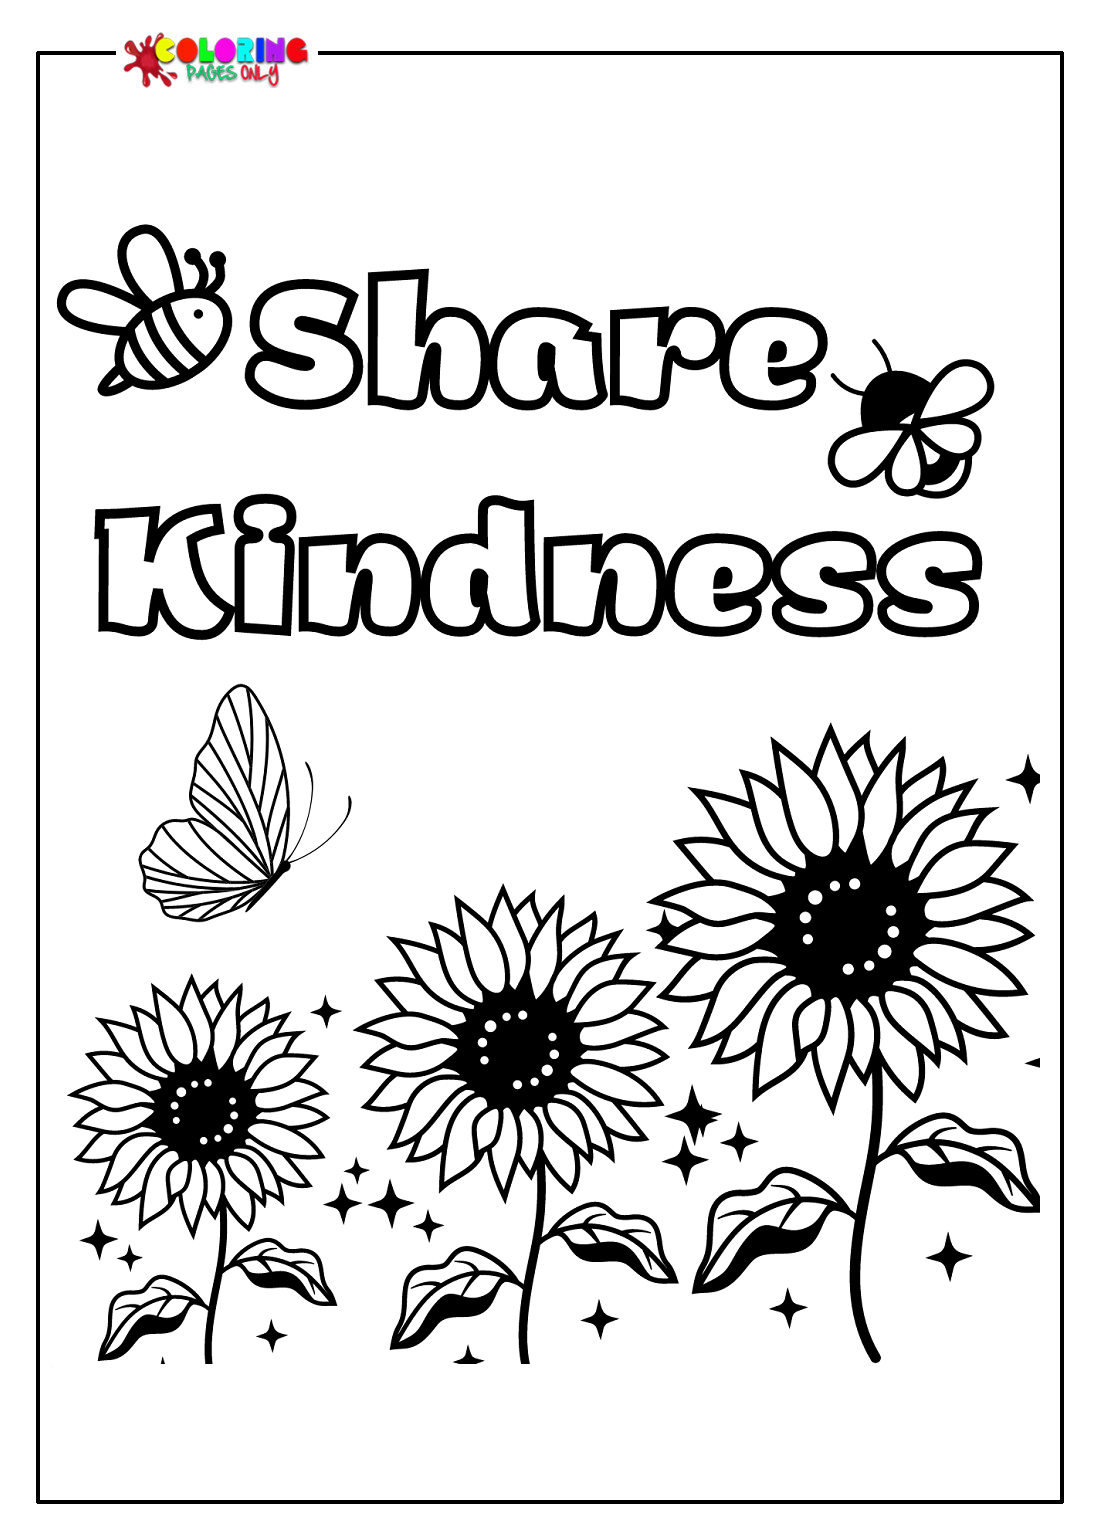 Share Kindness Coloring Page